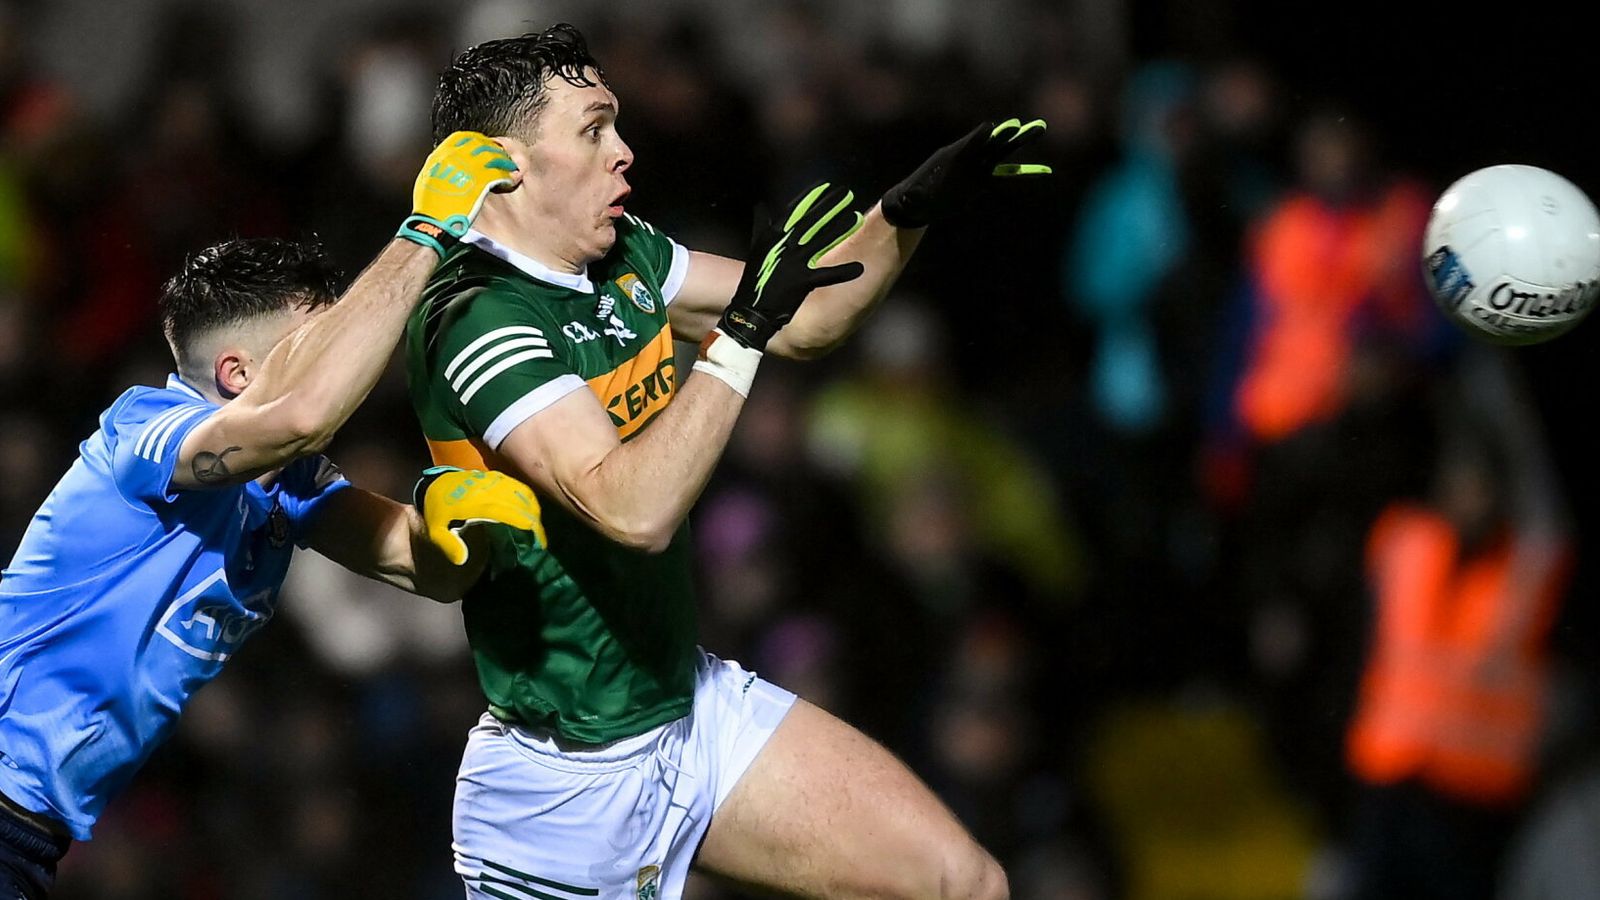 Kerry vs Dublin Old rivals face off in National Football League clash